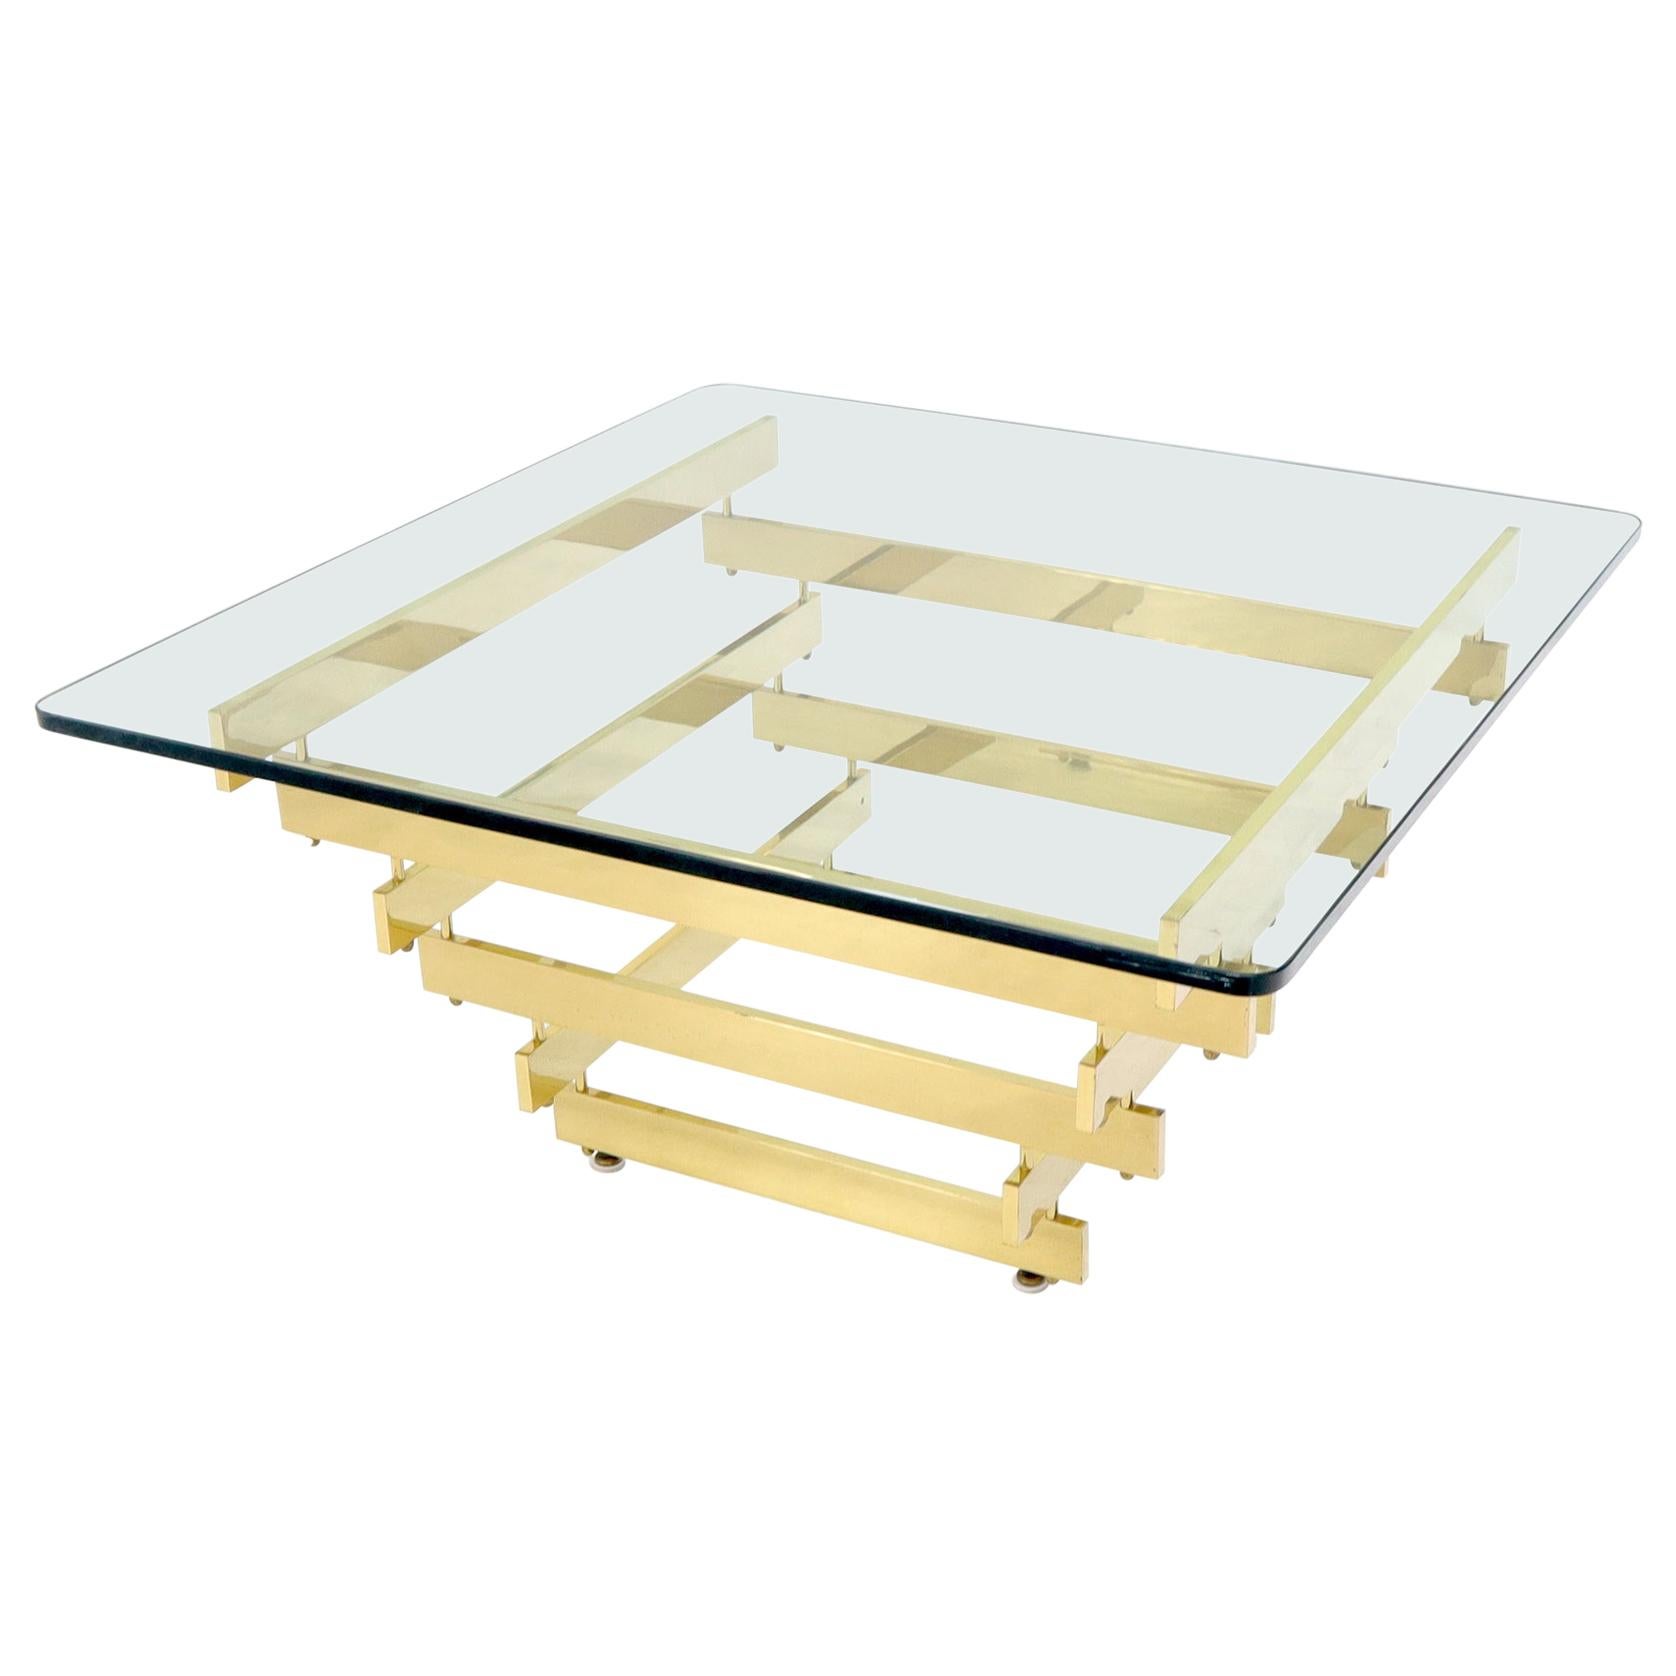 Stacked Polished Lacquered Brass Bars Base Glass Top Square Coffee Table